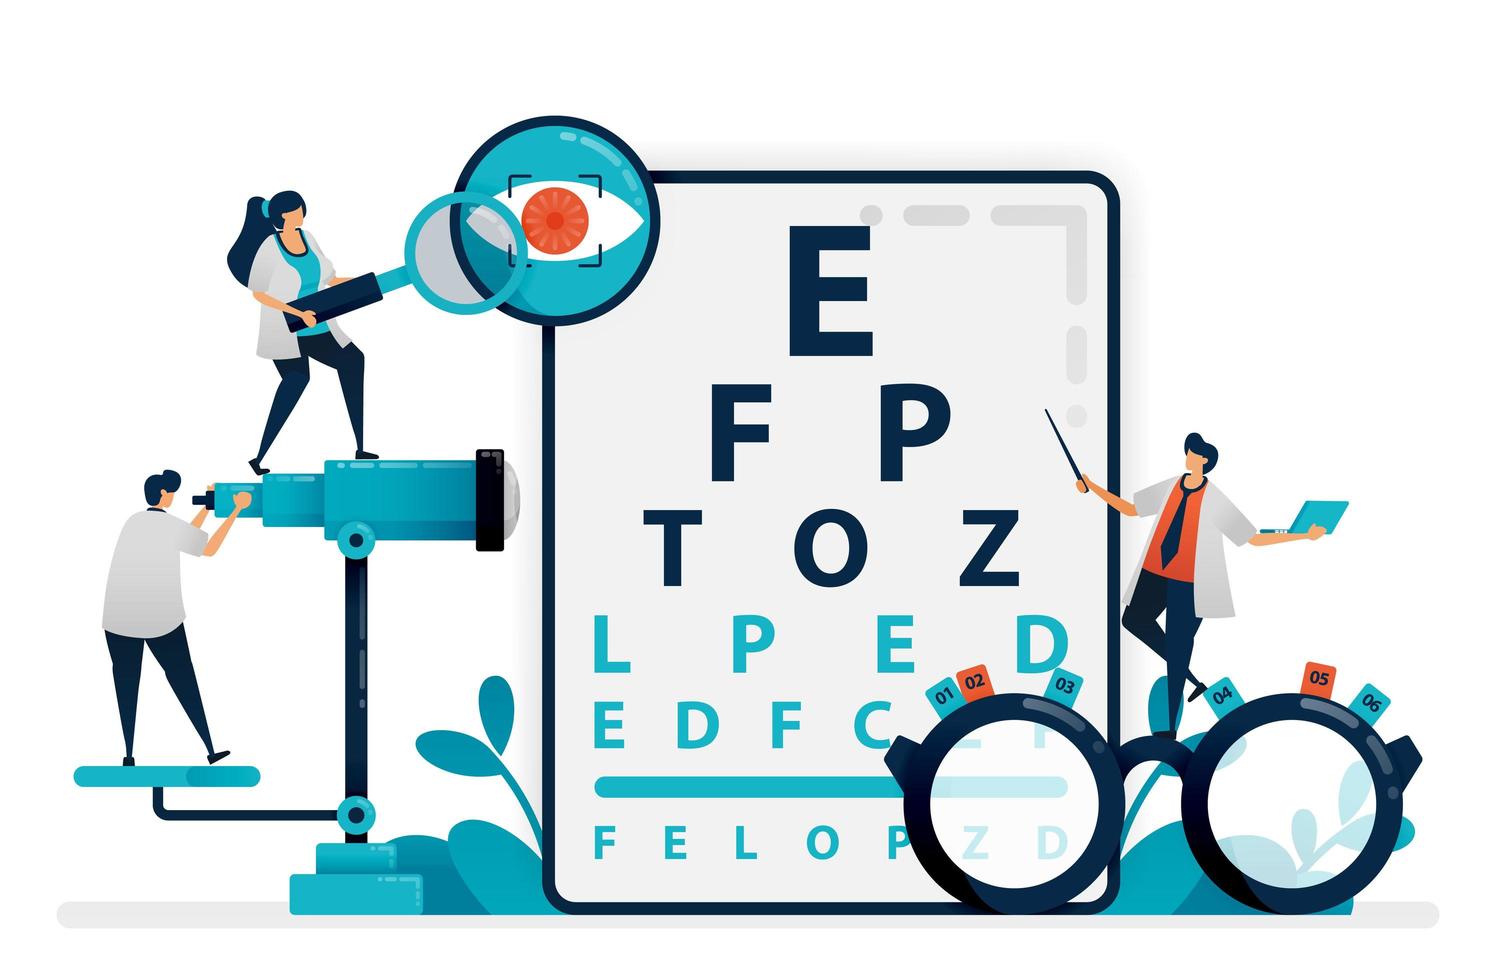 Doctor checks patient eyes health with snellen chart, glasses for eye disease. eye clinic or optical eyewear store. optician professional. Illustration for business card, banner, brochure, flyer, ads vector